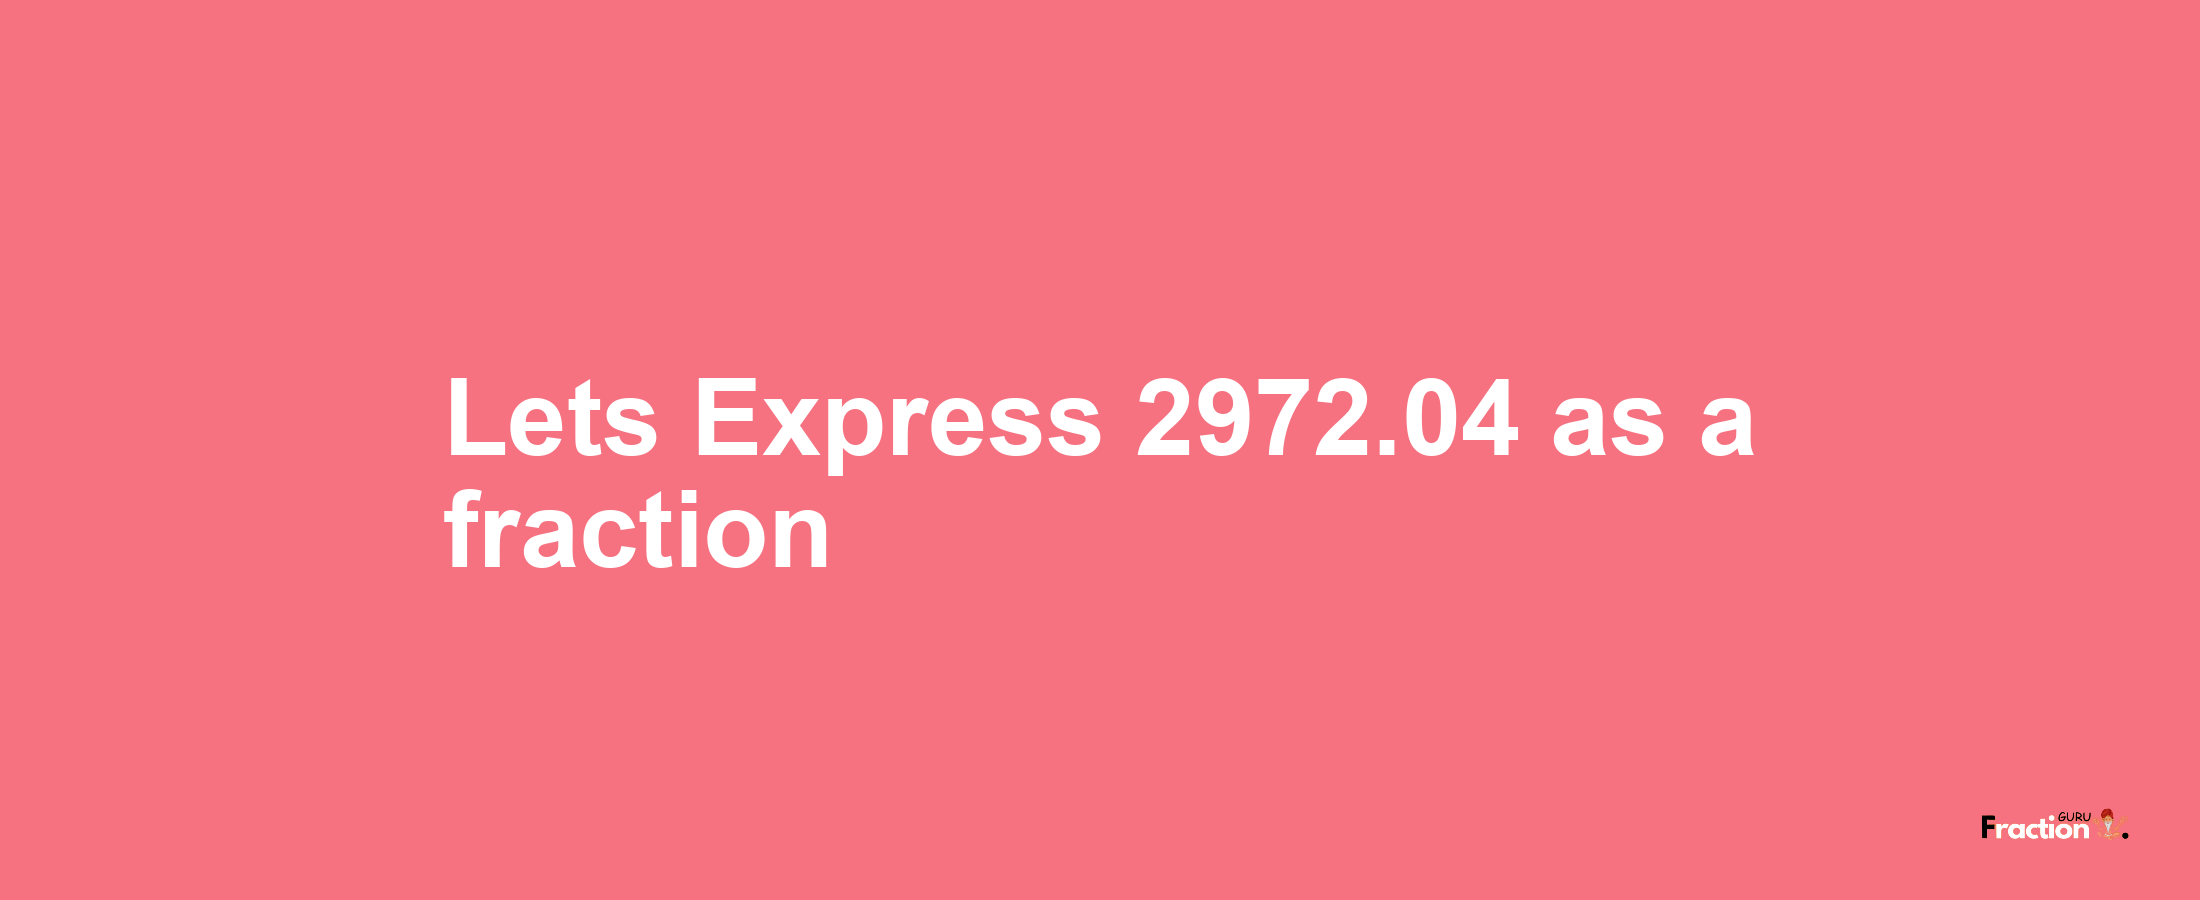 Lets Express 2972.04 as afraction